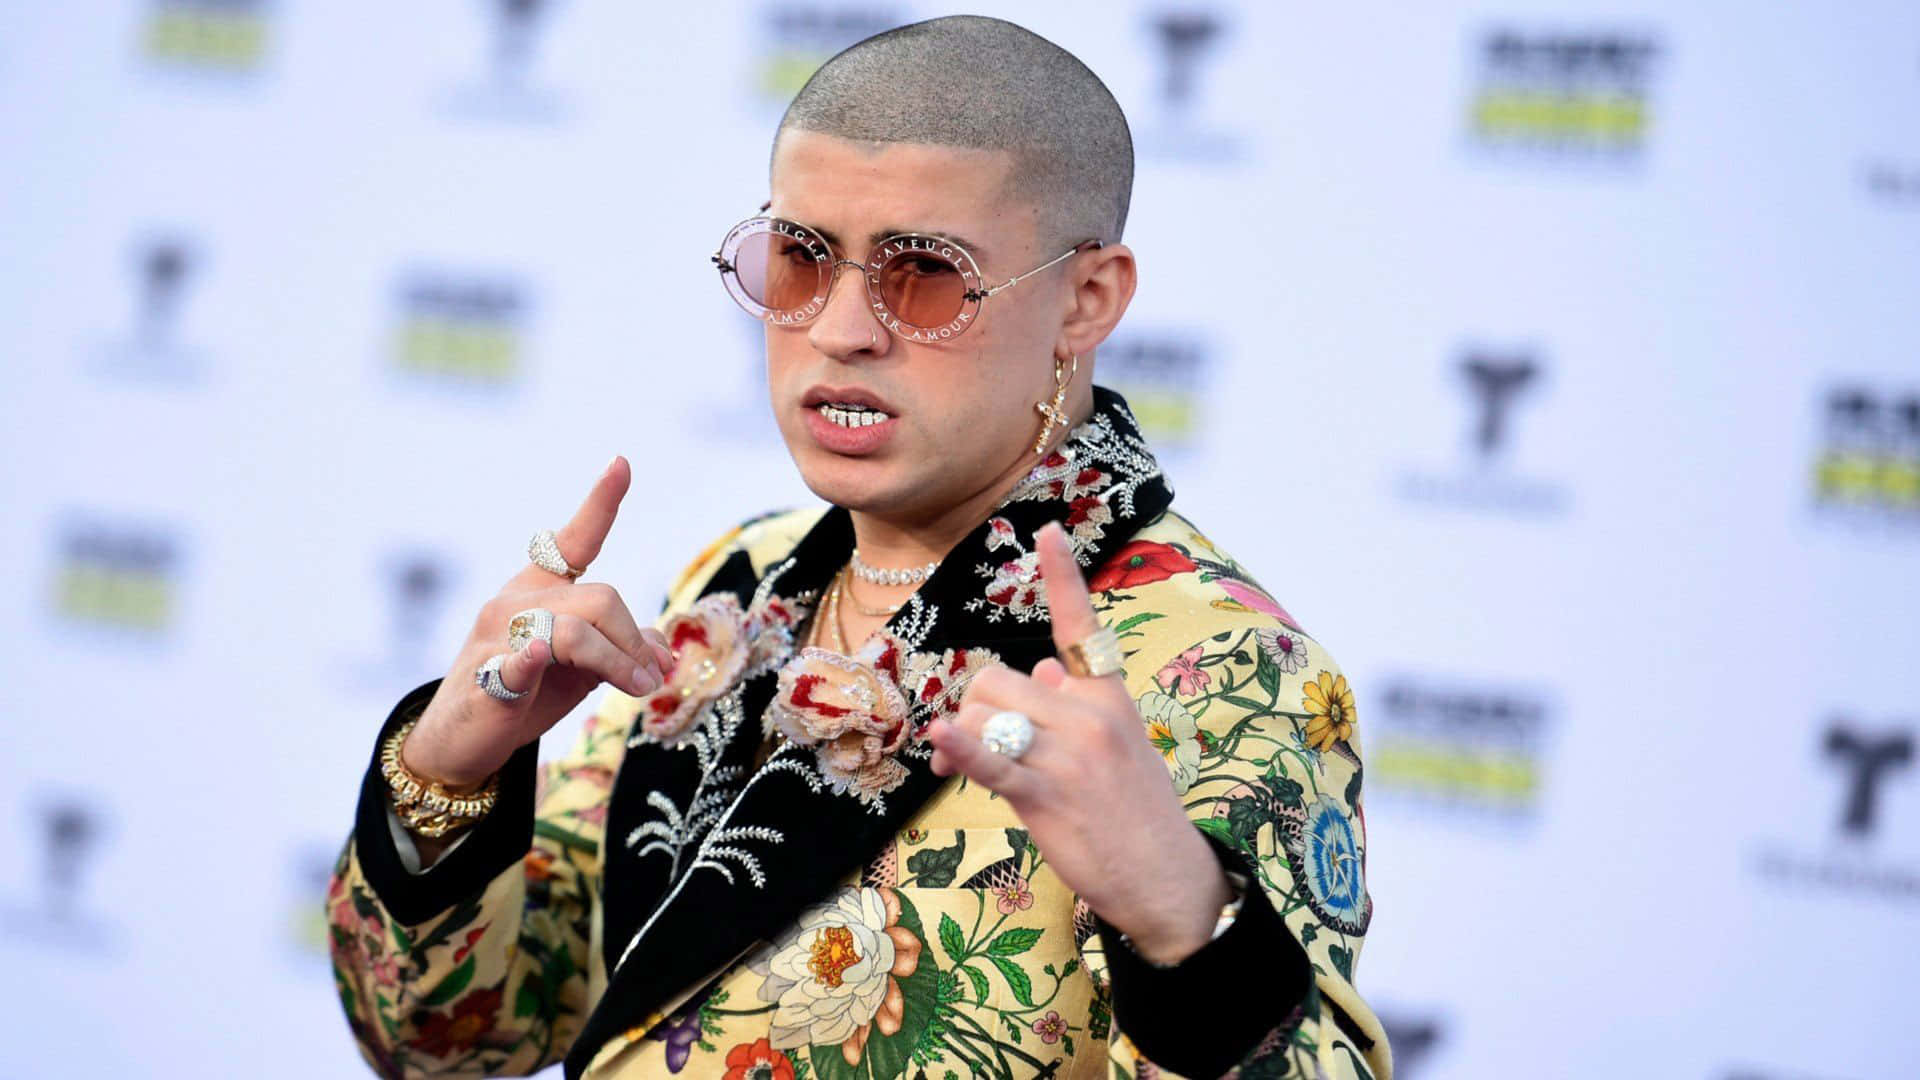 Bad Bunny Floral Jacket Style Wallpaper